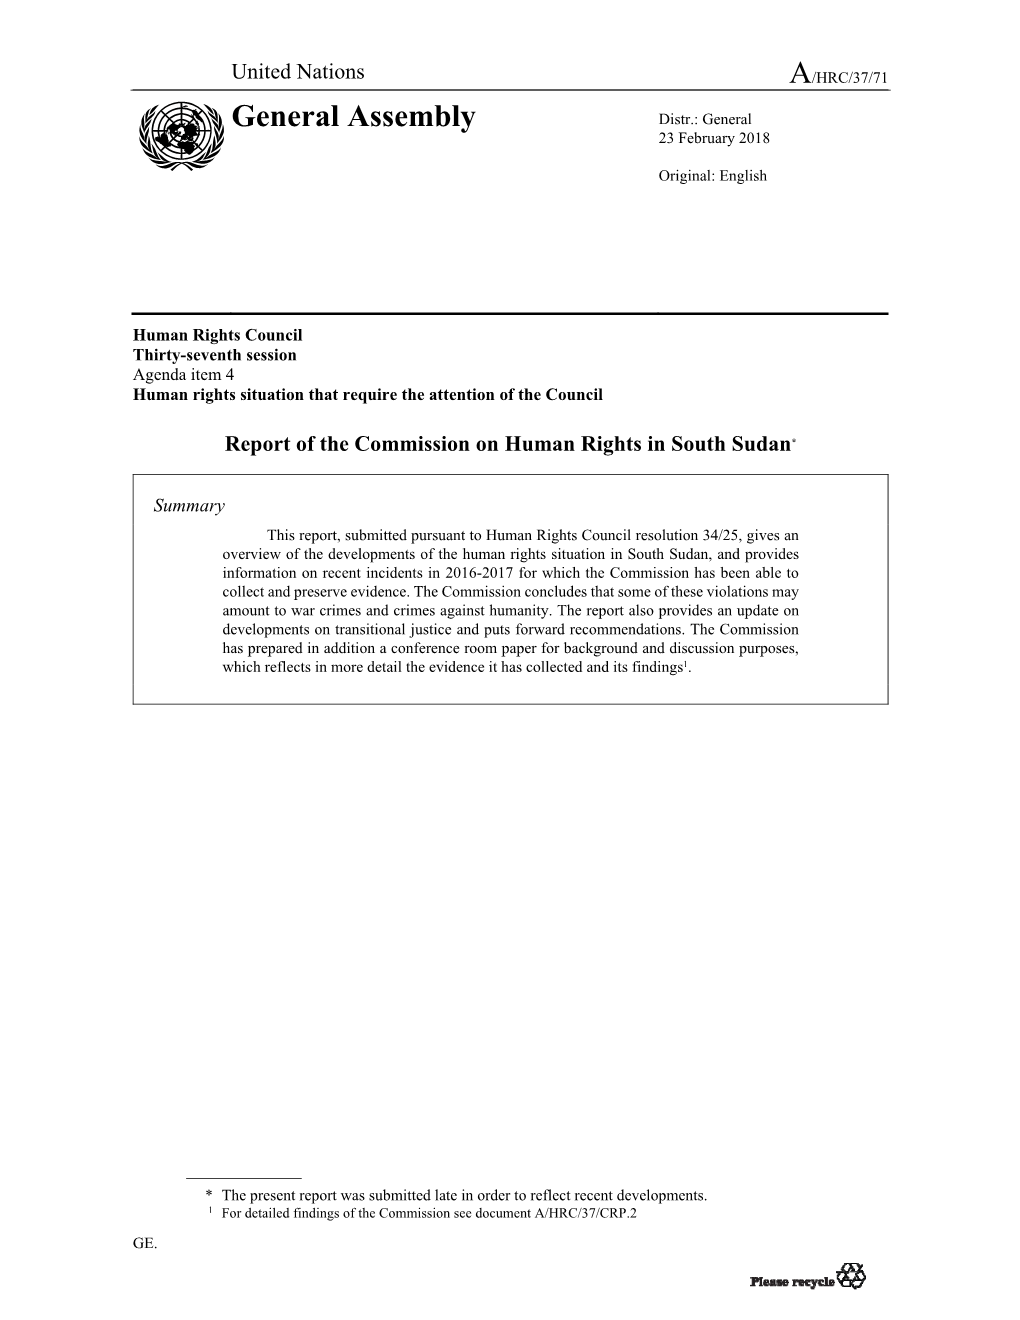 Report of the Commission on Human Rights in South Sudan*